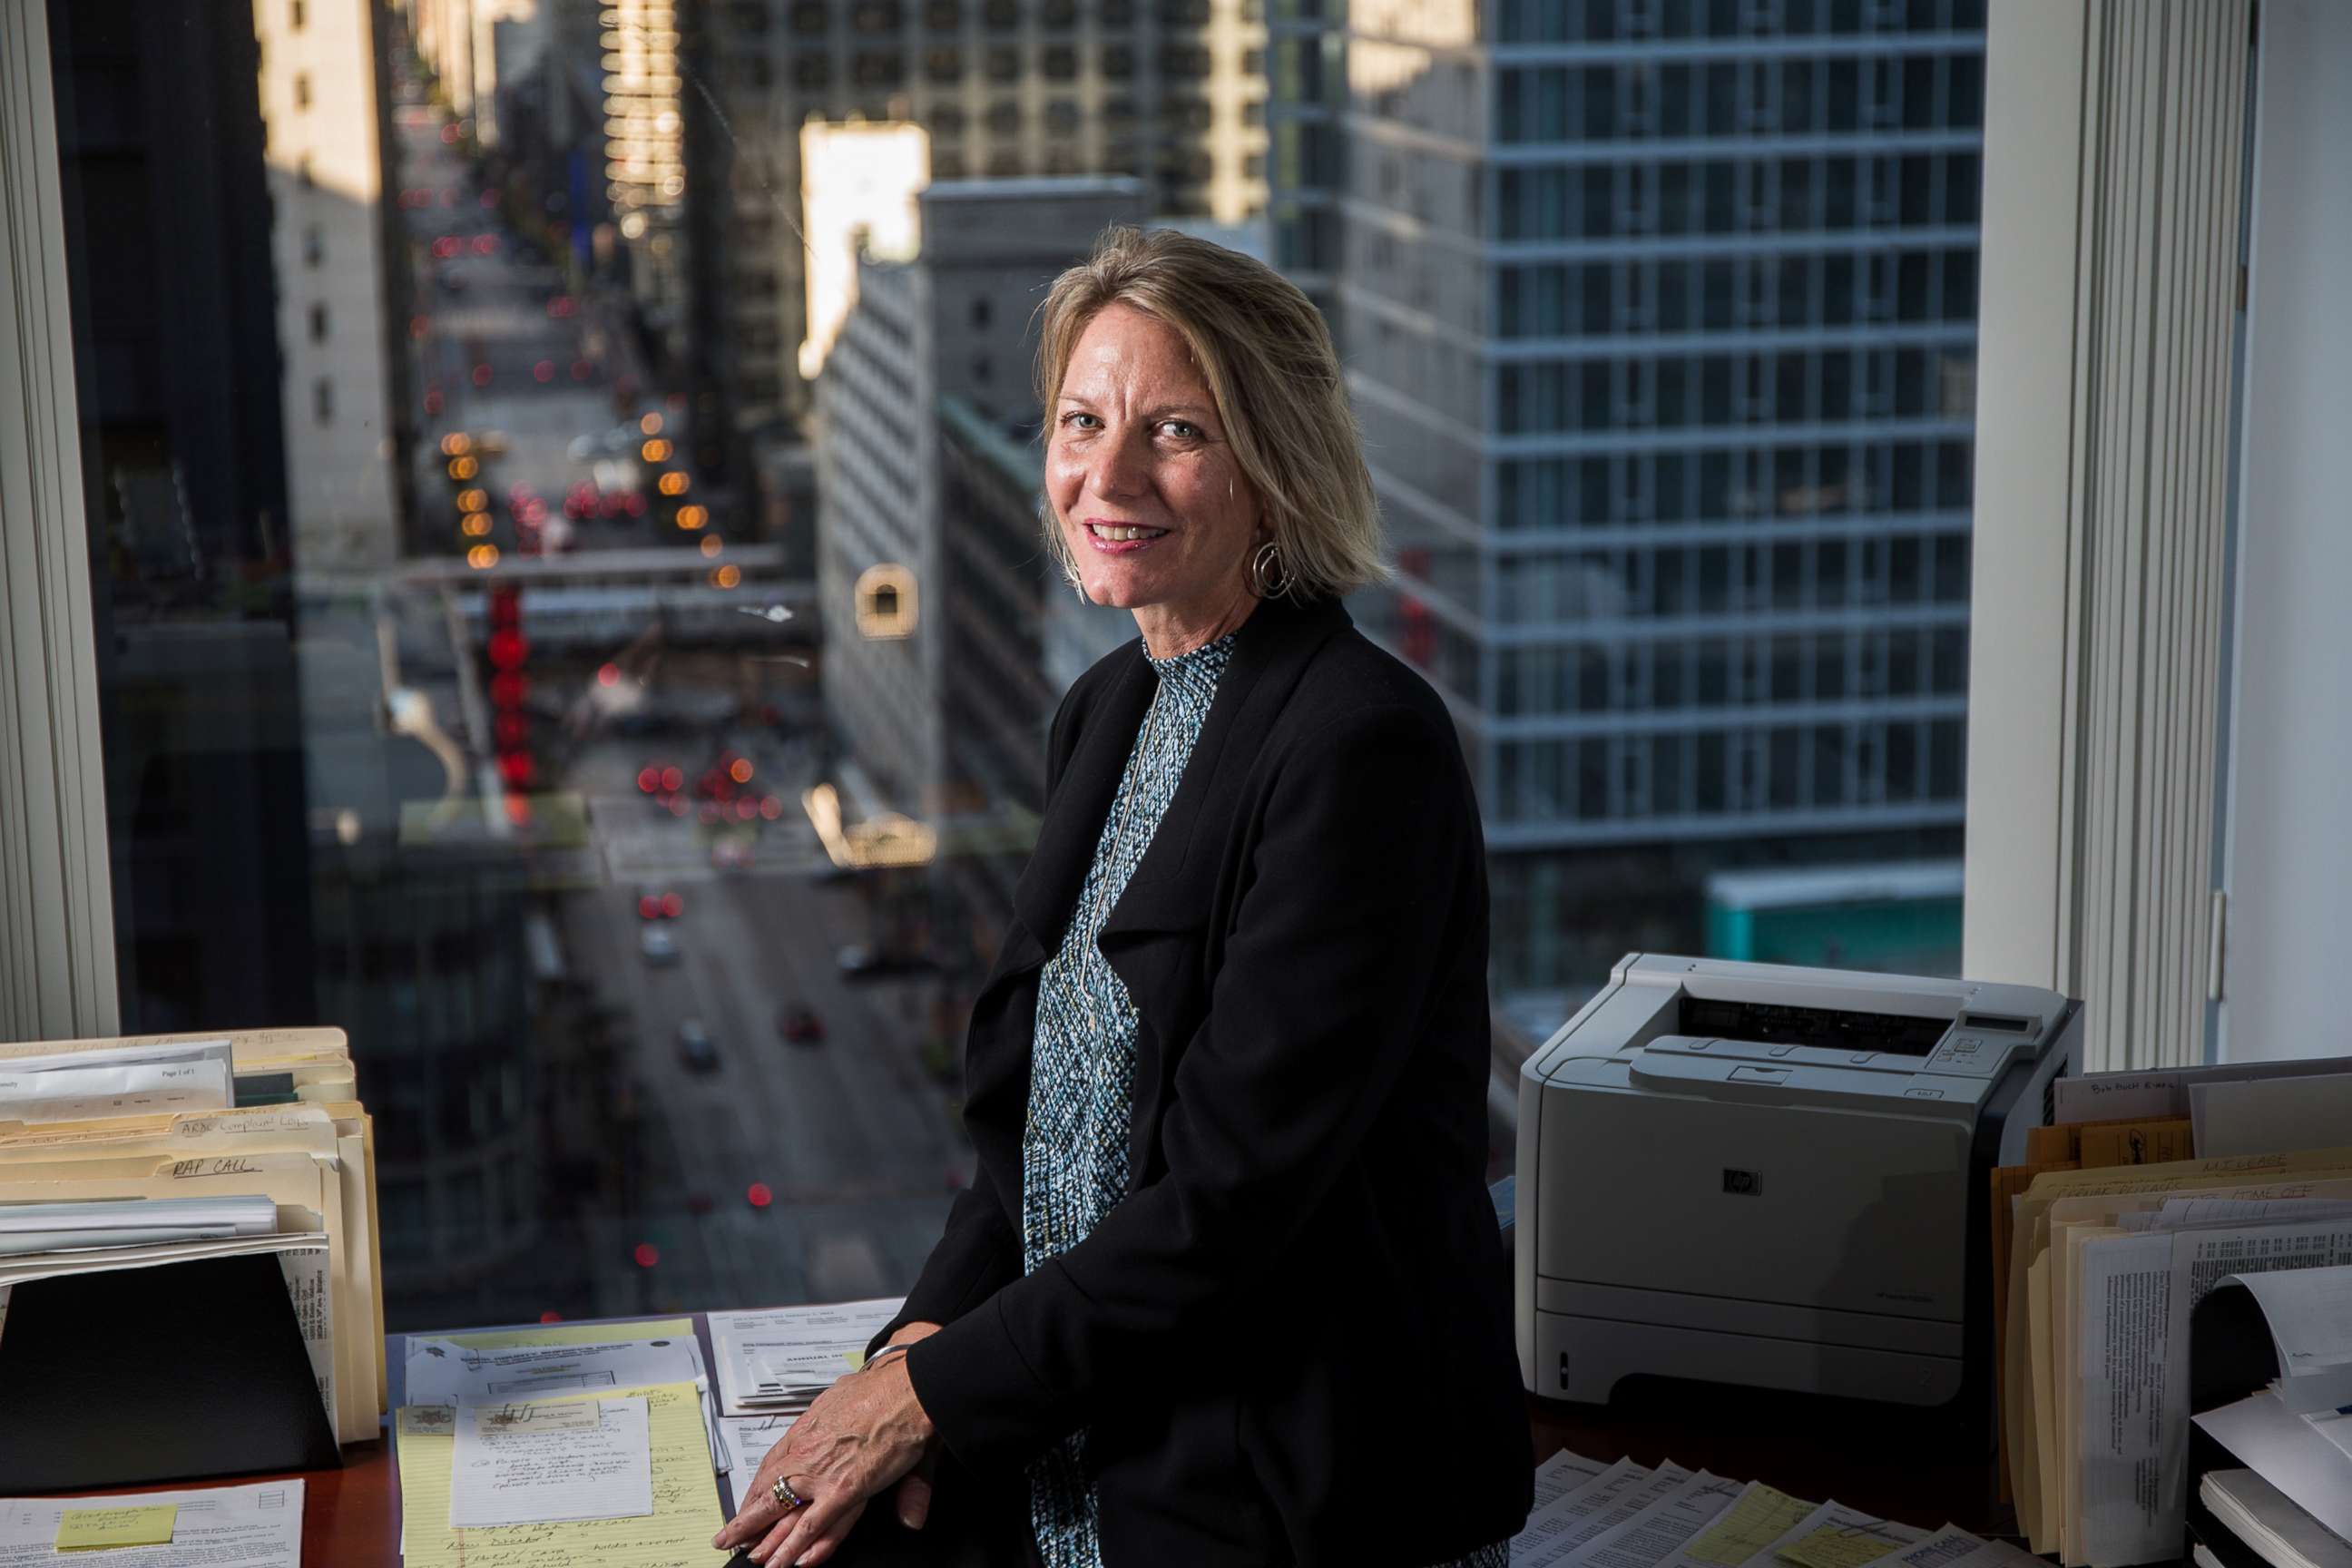 PHOTO: Cook County Public Defender Amy Campanelli poses for a portrait on Oct. 14, 2015 at her office in Chicago.